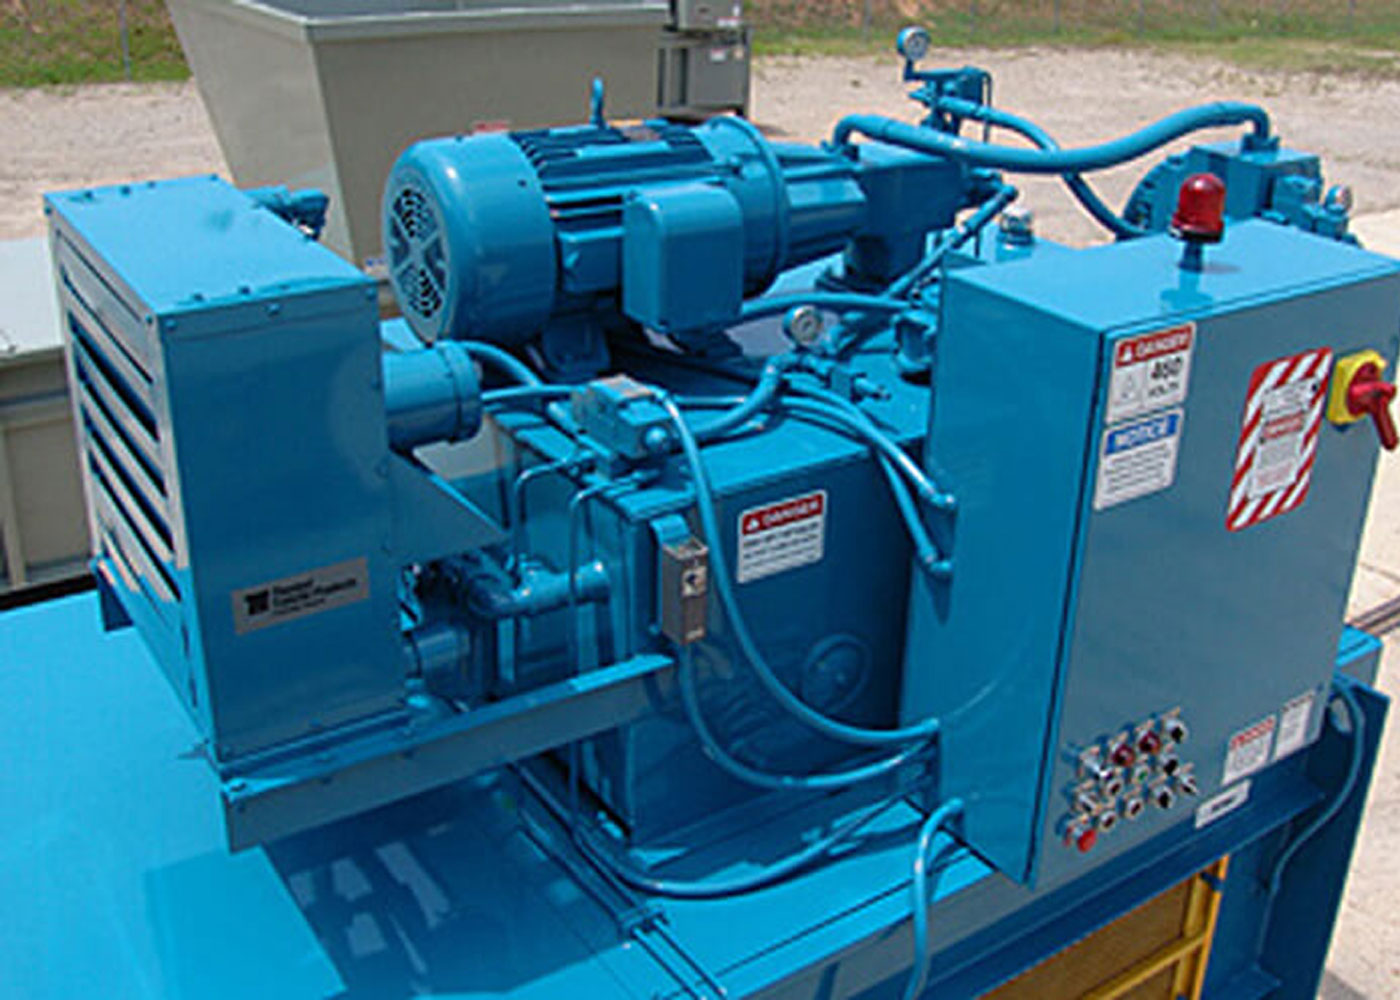 Horizontal recycling balers power station from Marathon recycling equipment